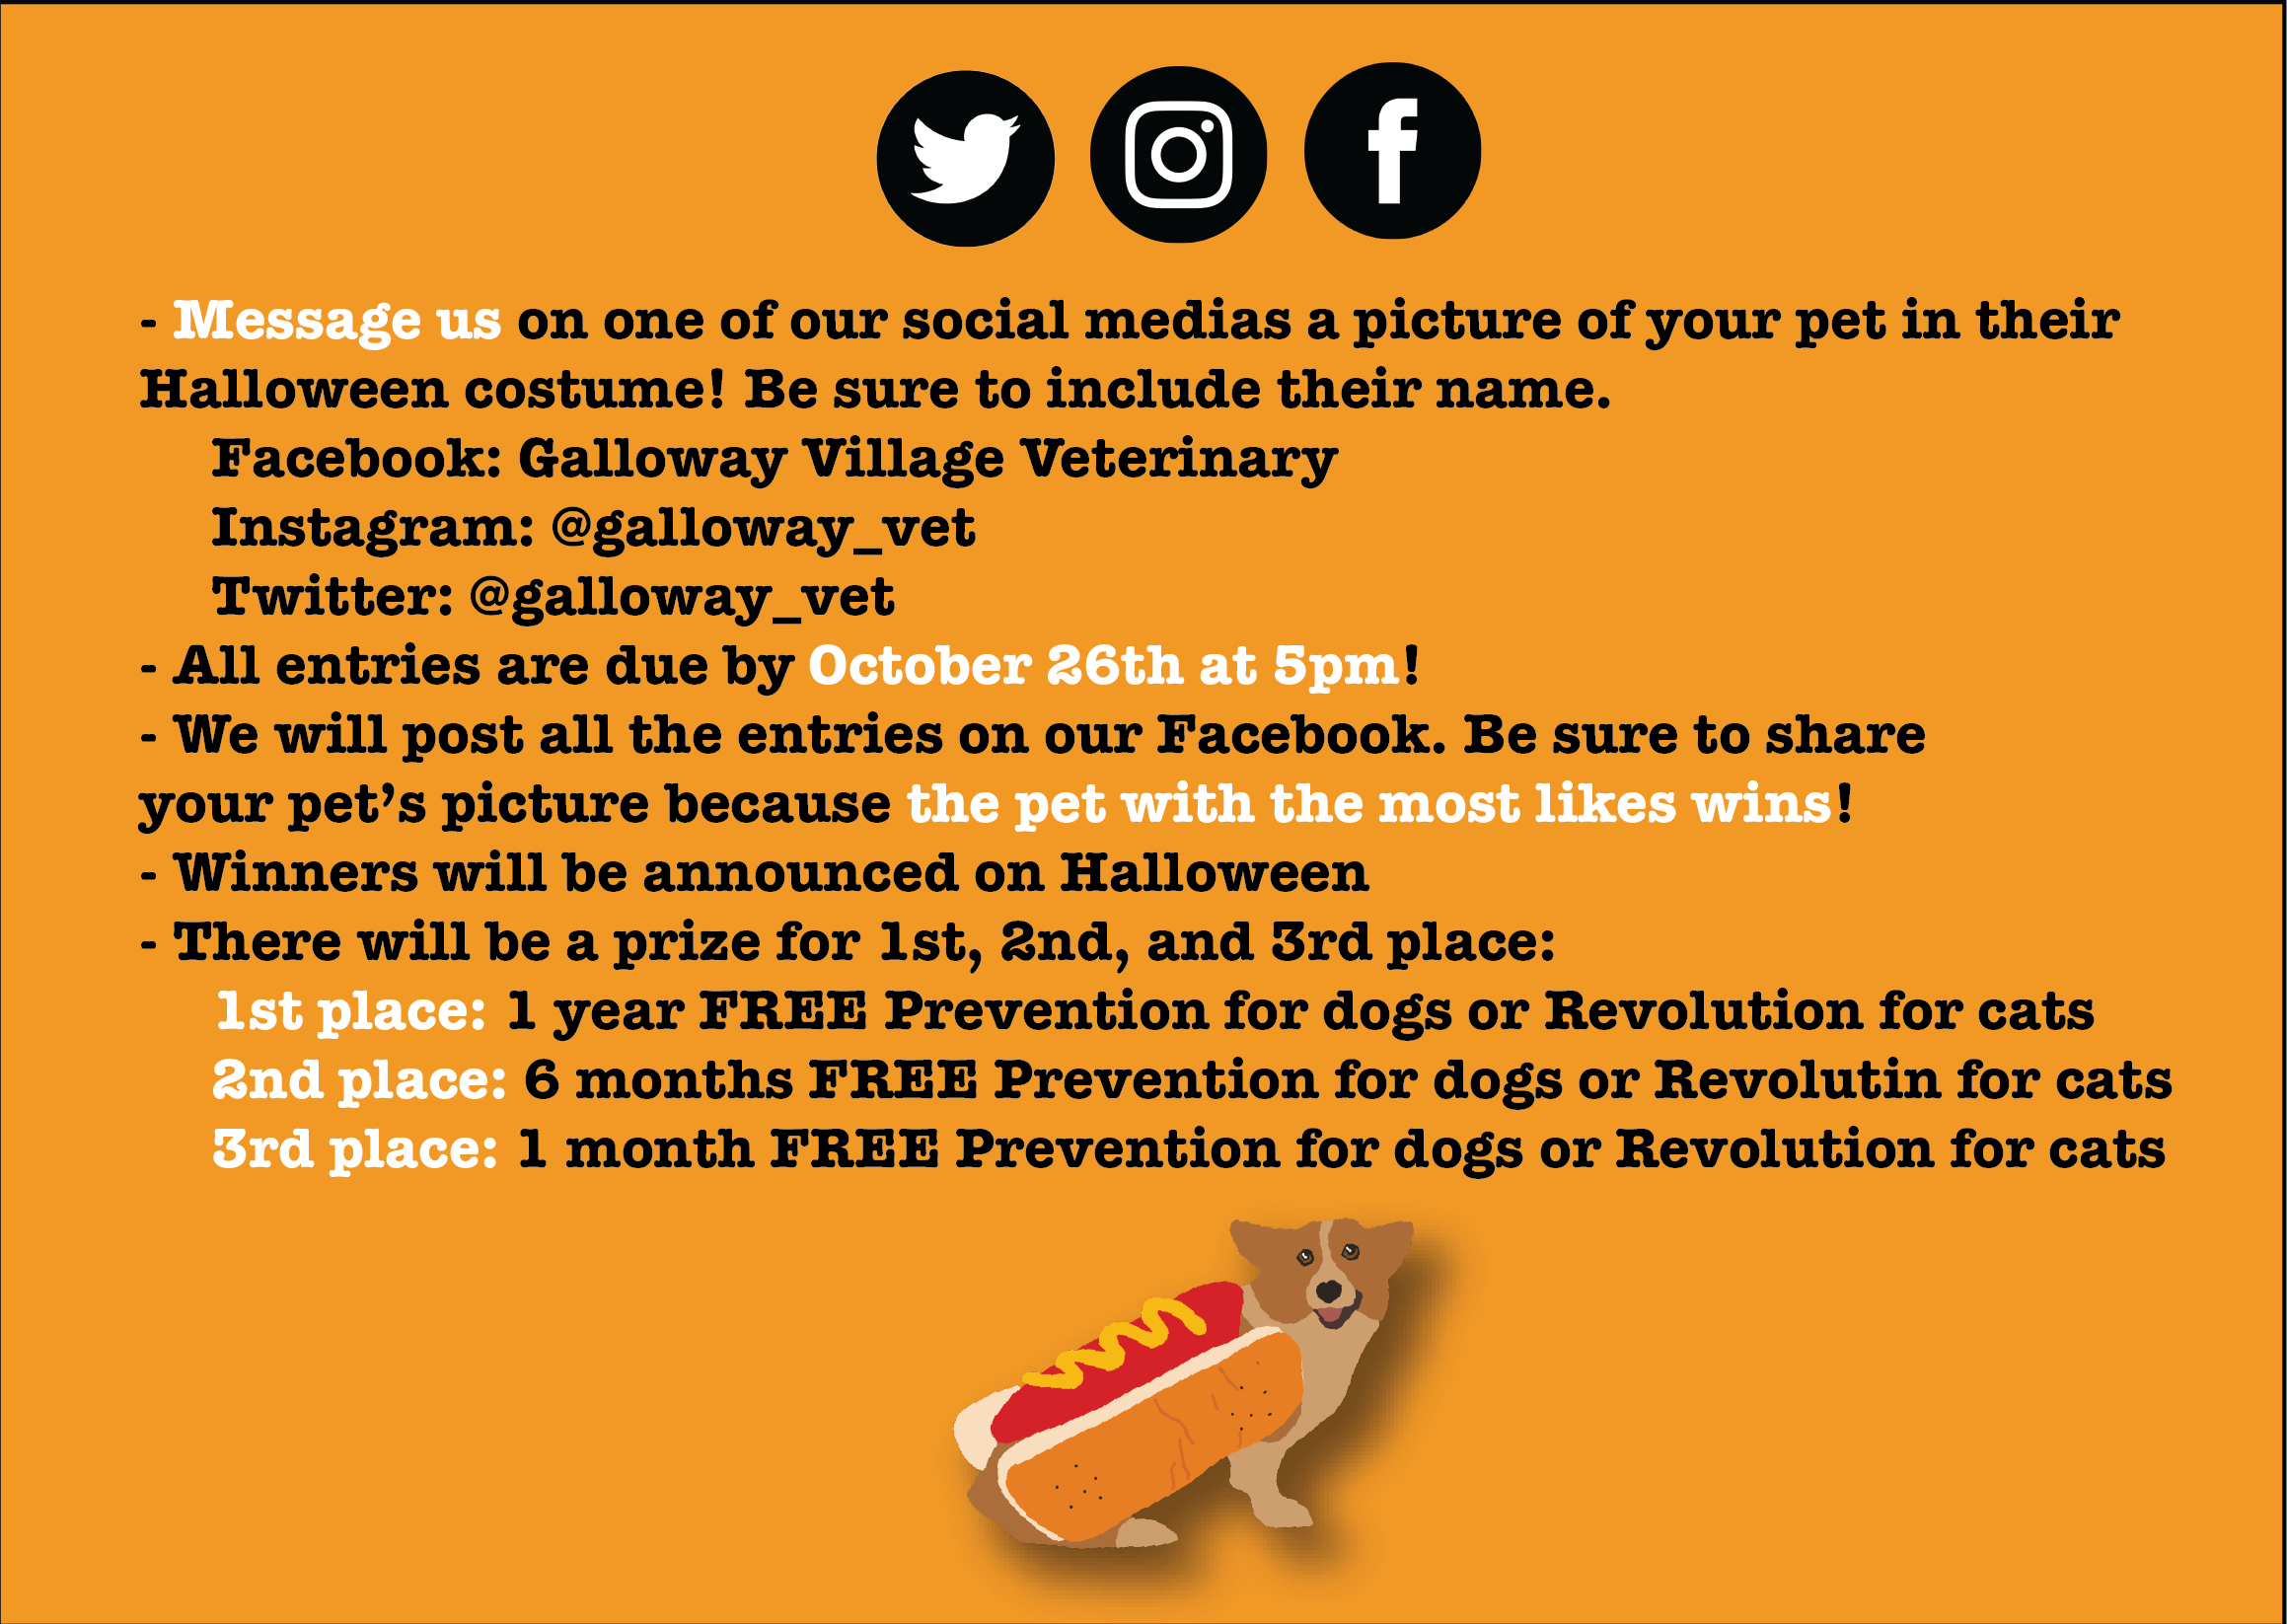 The details for Galloway Village Veterinary's Annual Costume Contest